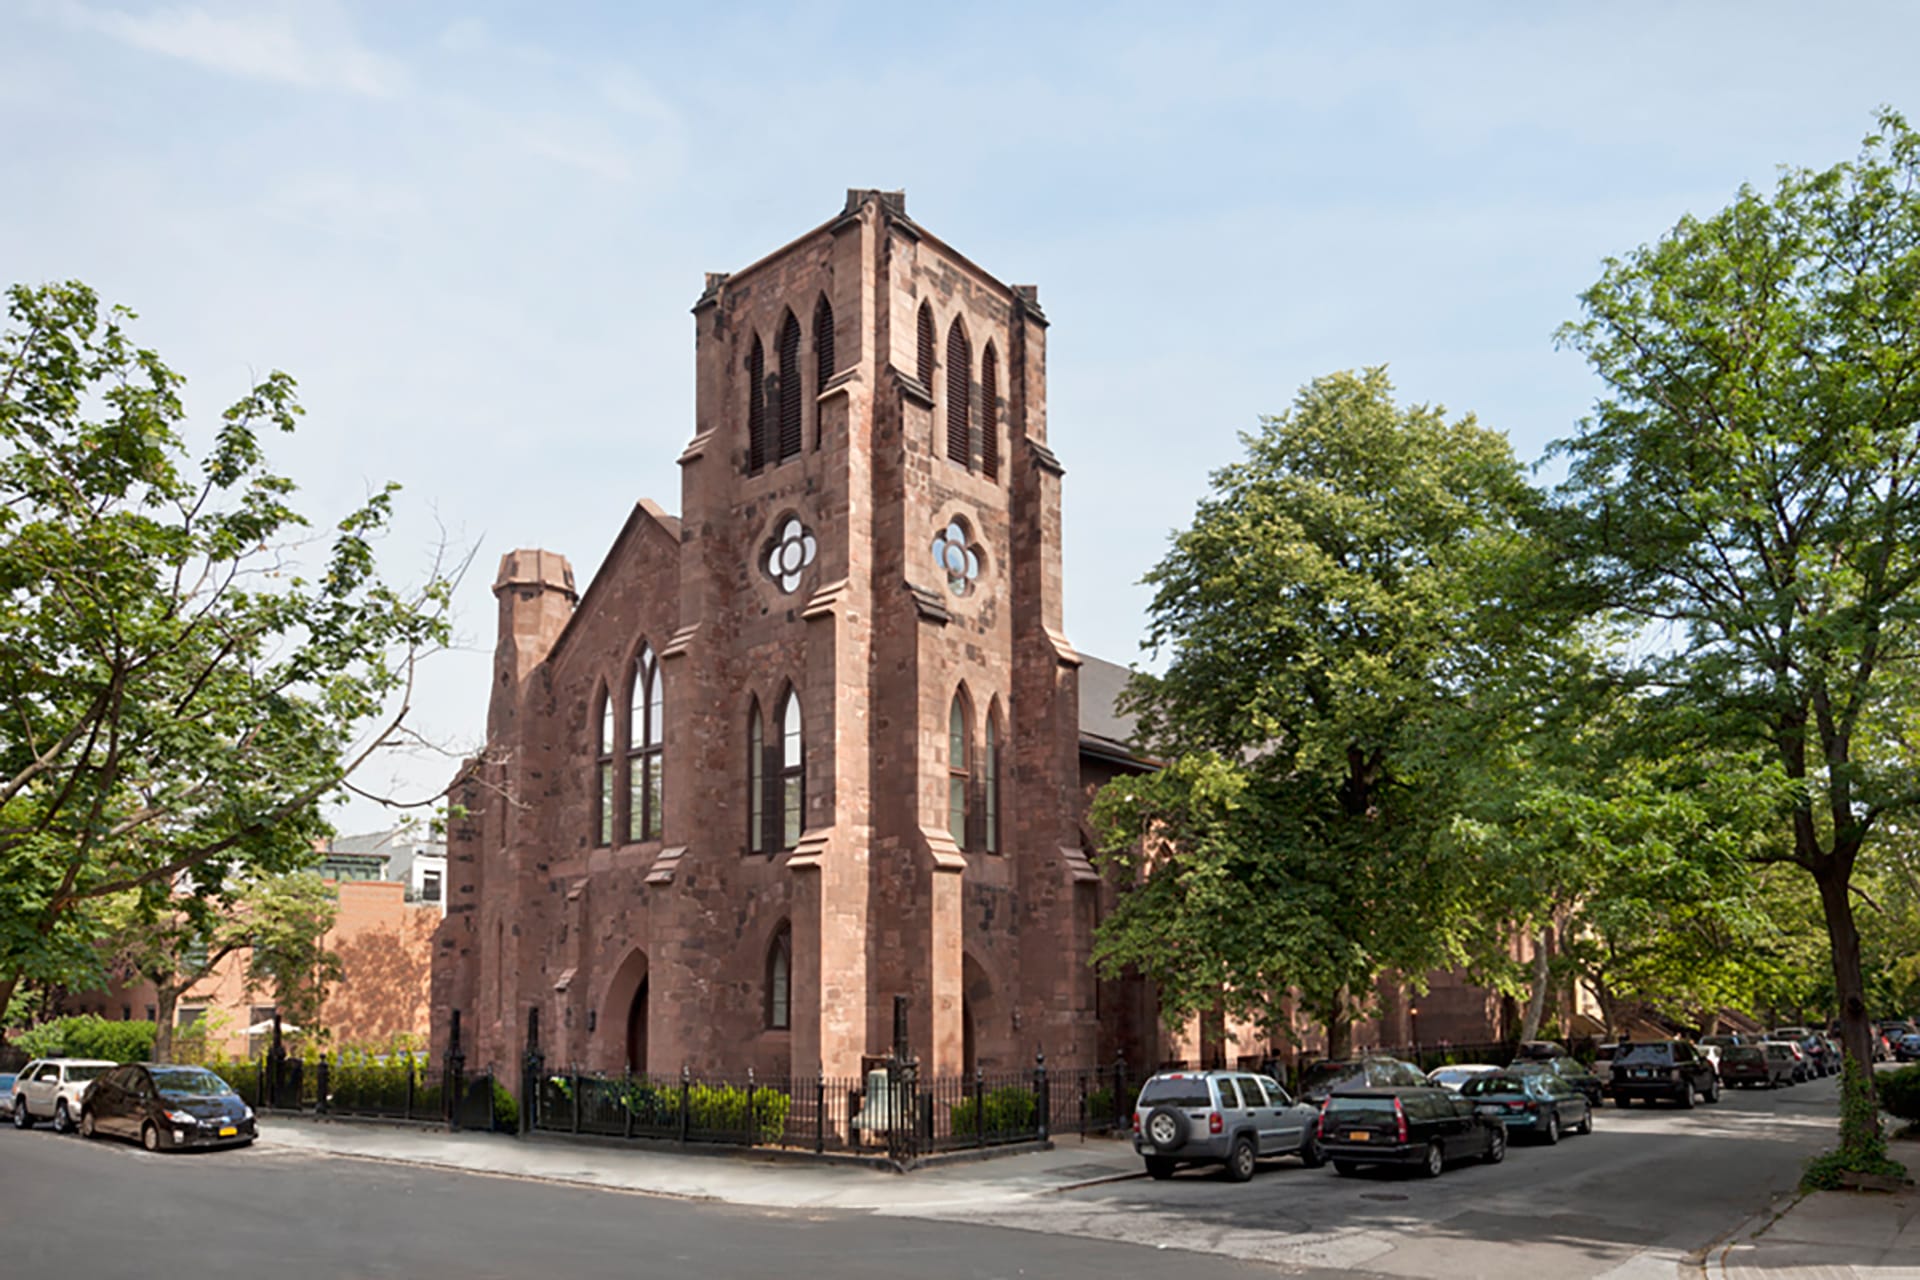 Exterior of a brownstone church after we refurbished and converted the building into condo units